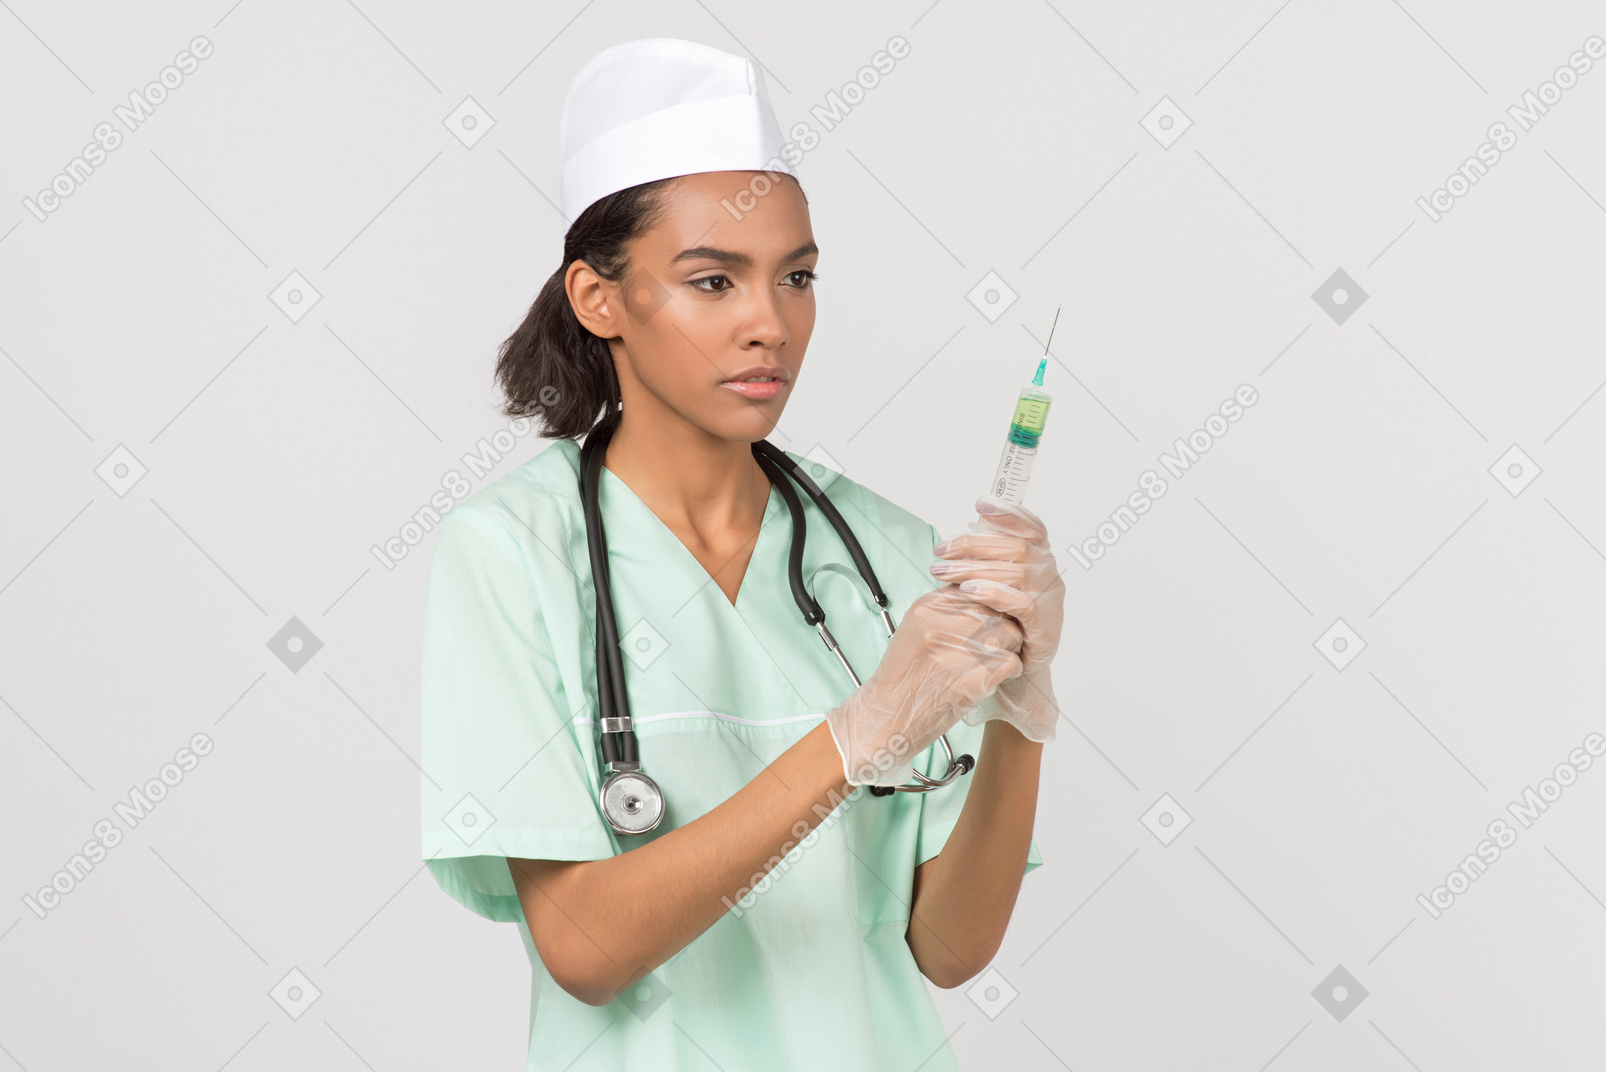 Concerned on some injections' preparing